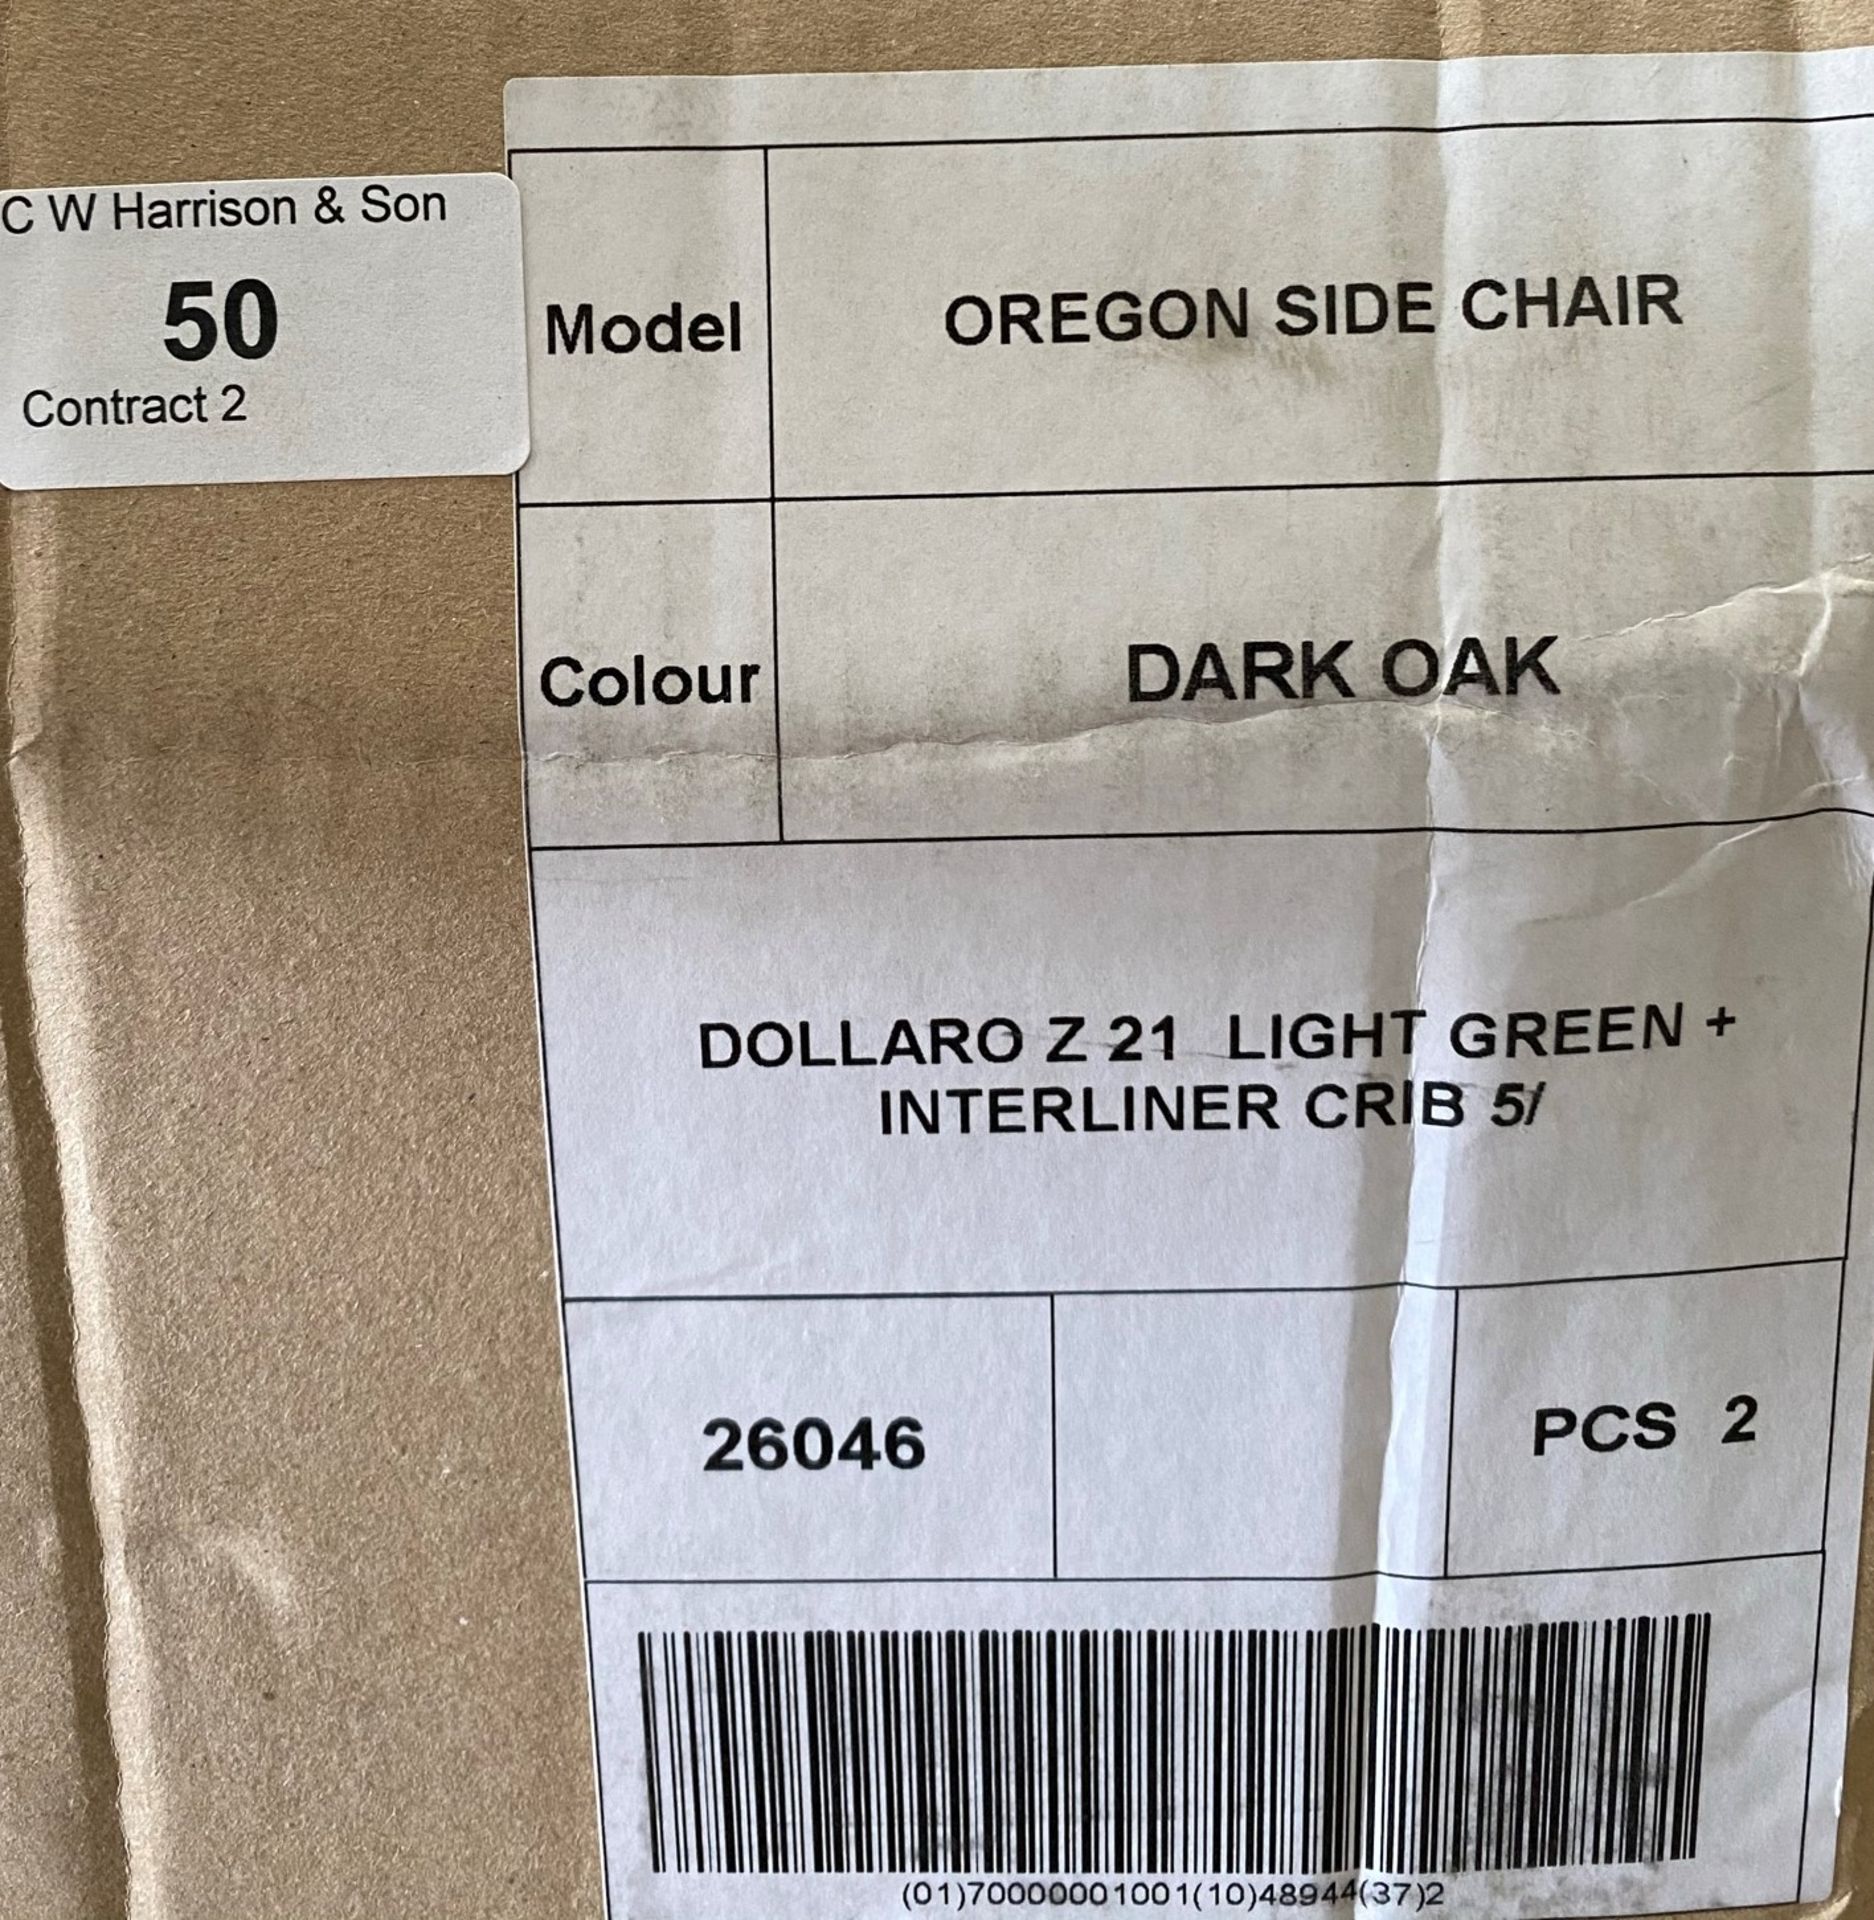 2 x Oregon Dollaro Z21 Light Green + Interliner Crib 5 side/dining chairs with dark oak coloured - Image 3 of 3